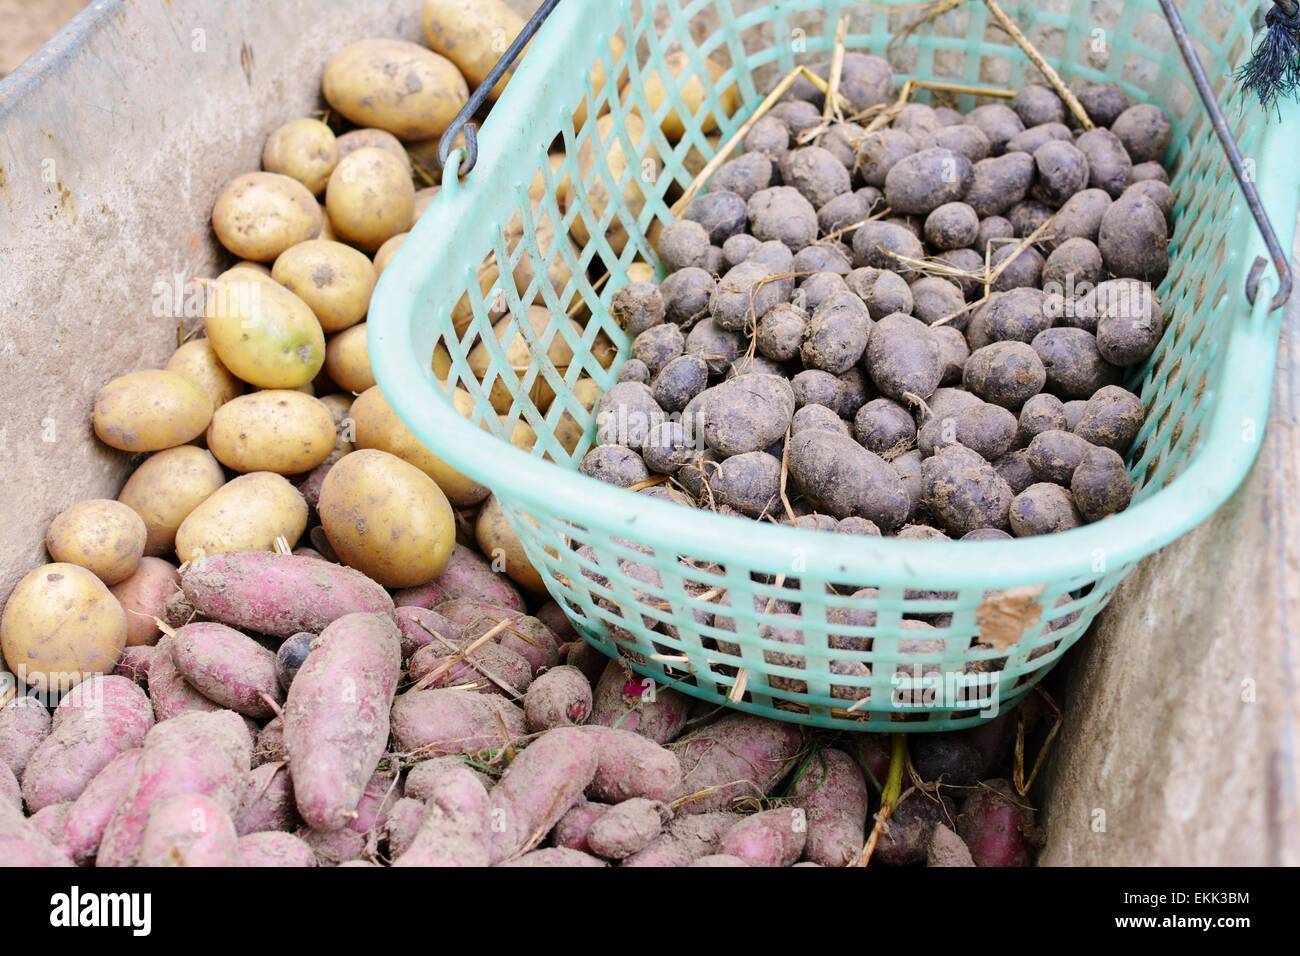 Wheelbarrow full of different kind of harvested potatoes. Kind of potatoes: Triplo, Red Emma, Bergerac Stock Photo